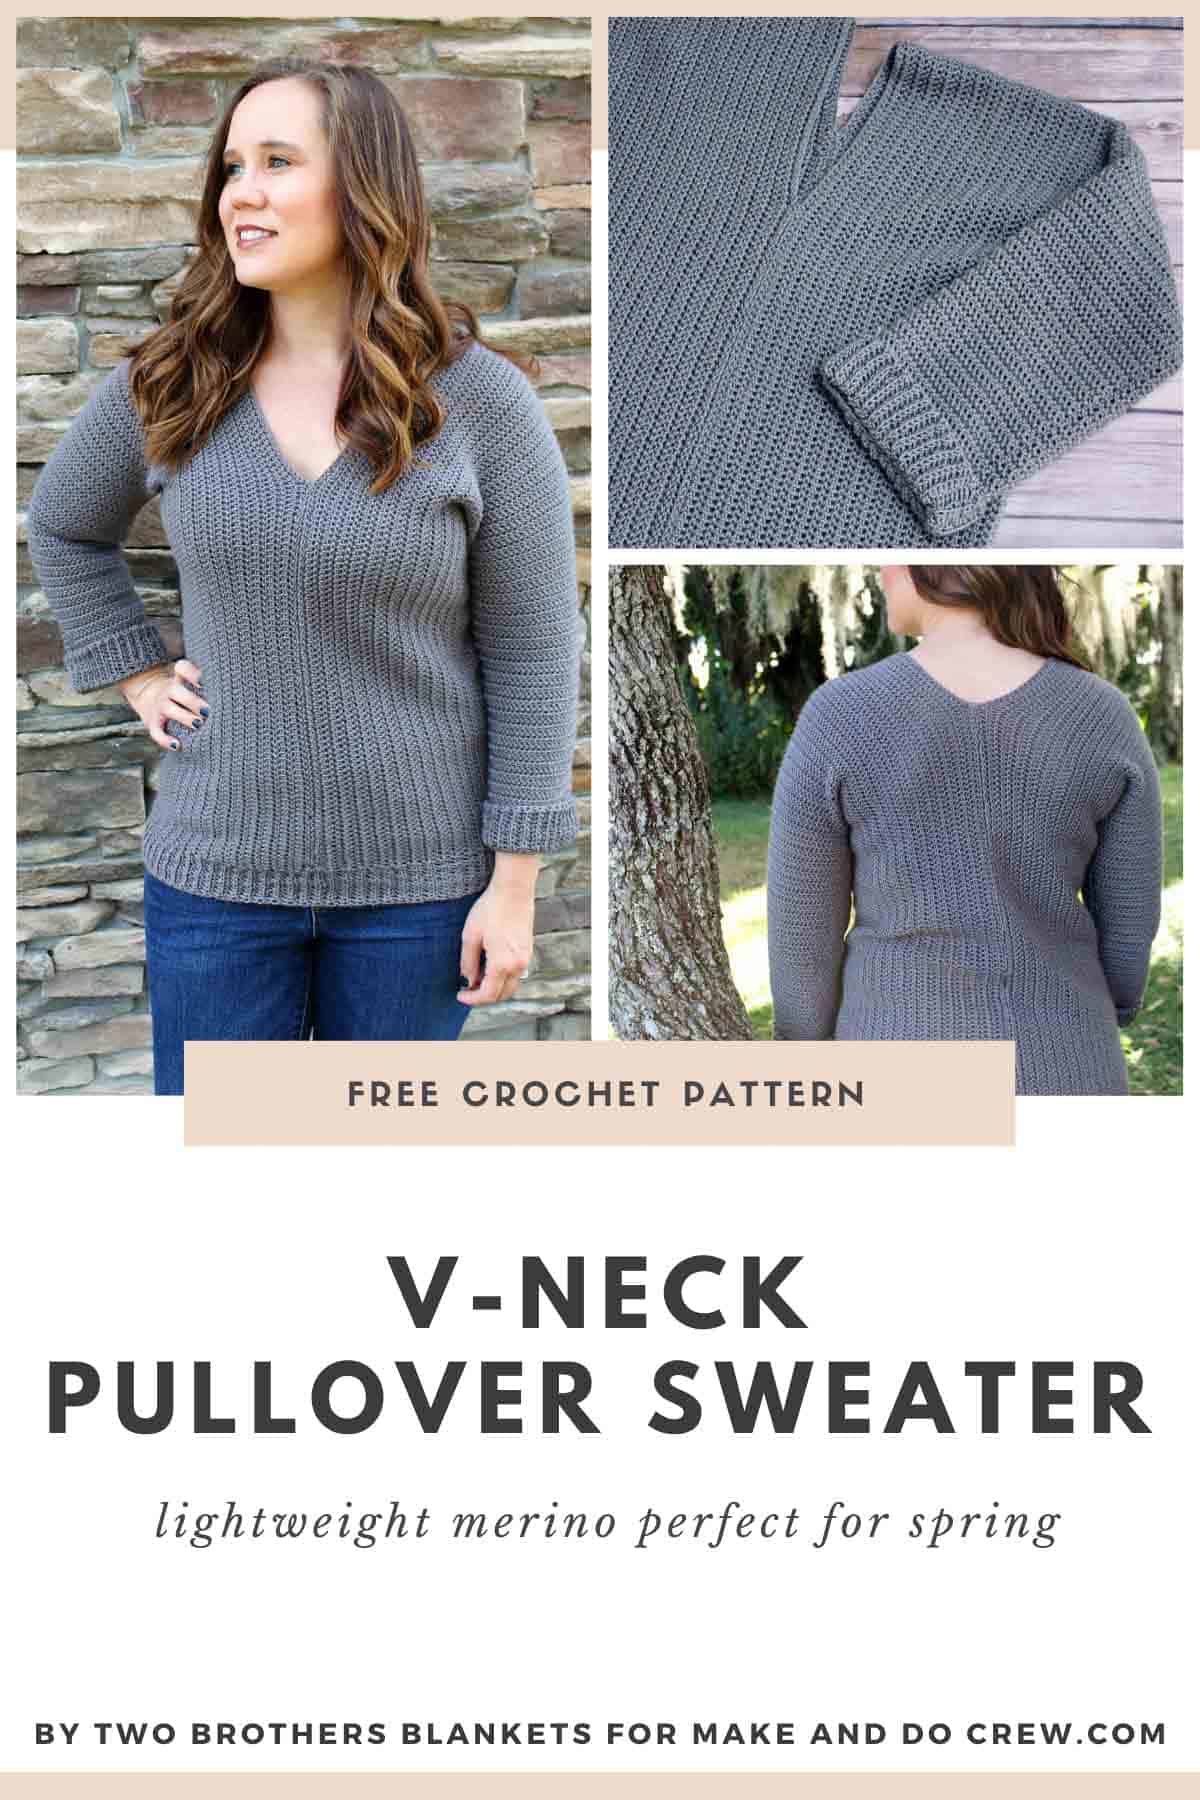 Free crochet pattern for a v-neck pullover sweater, made with Lion Brand yarn.